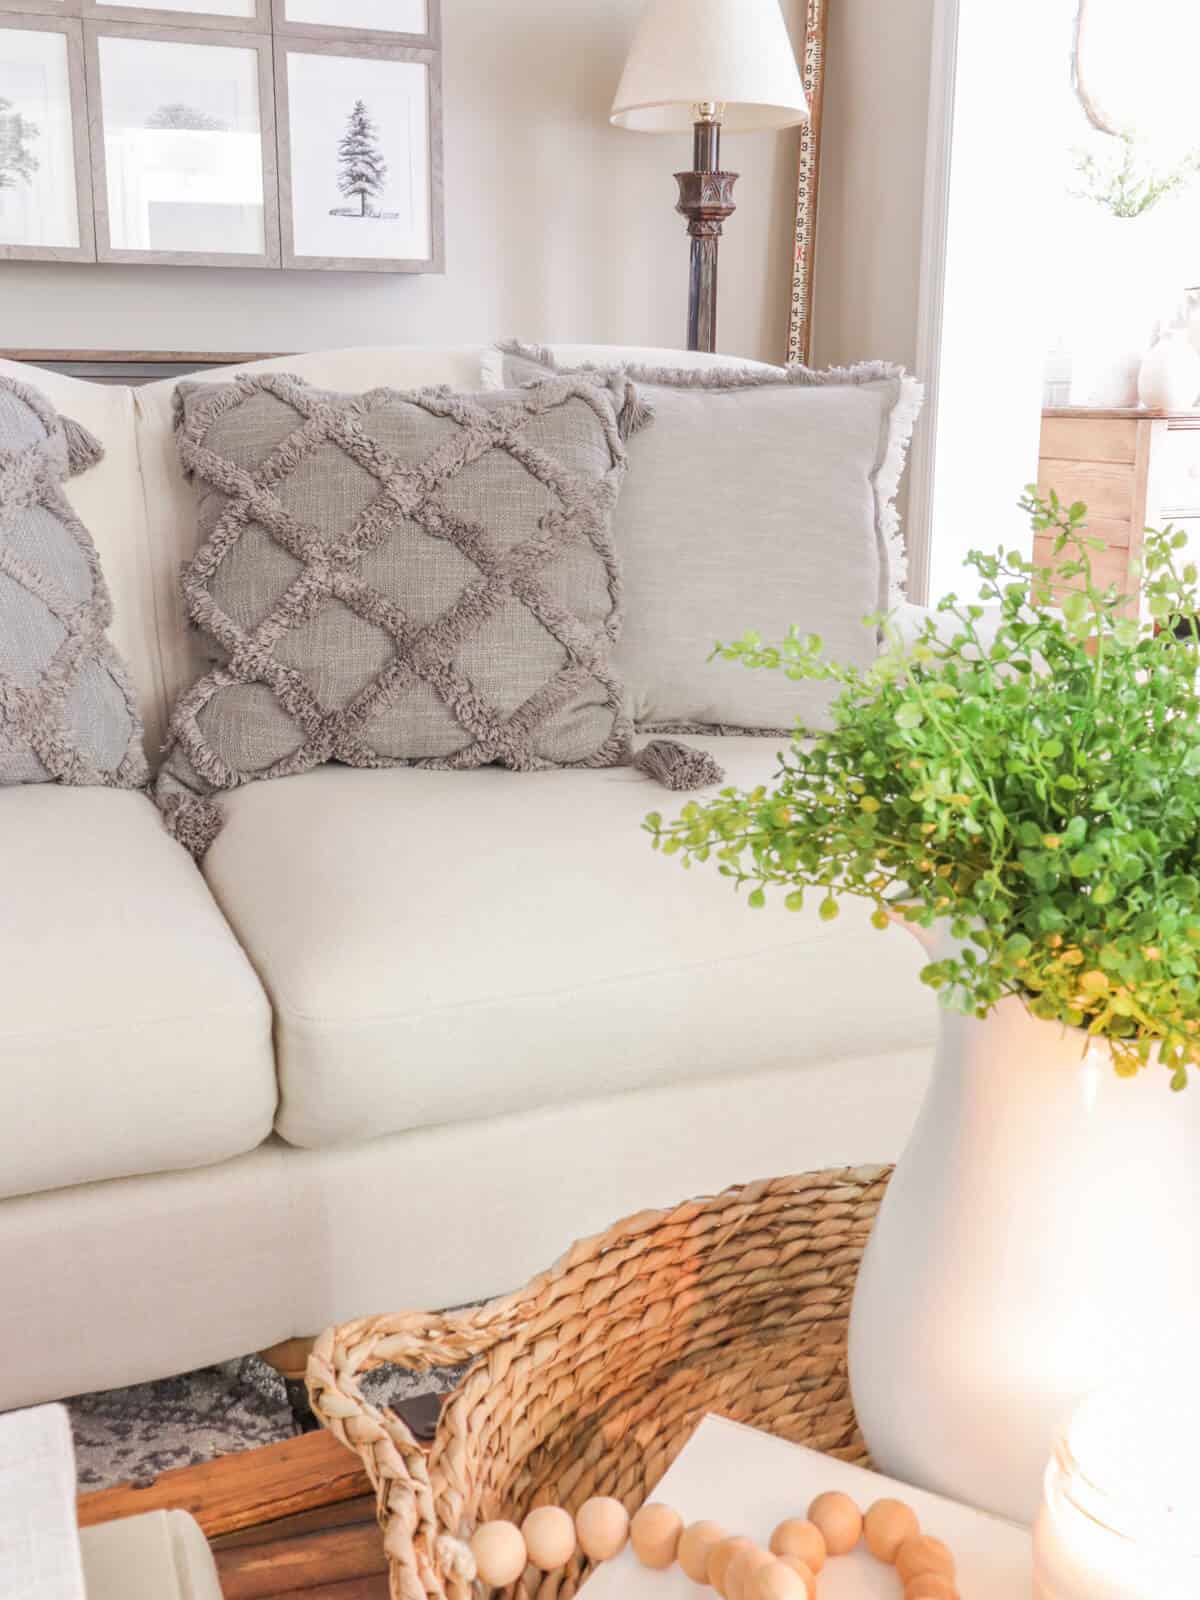 cream sofa with gray pillows with a coffee table in front holding a woven tray and white vase filled with greenery